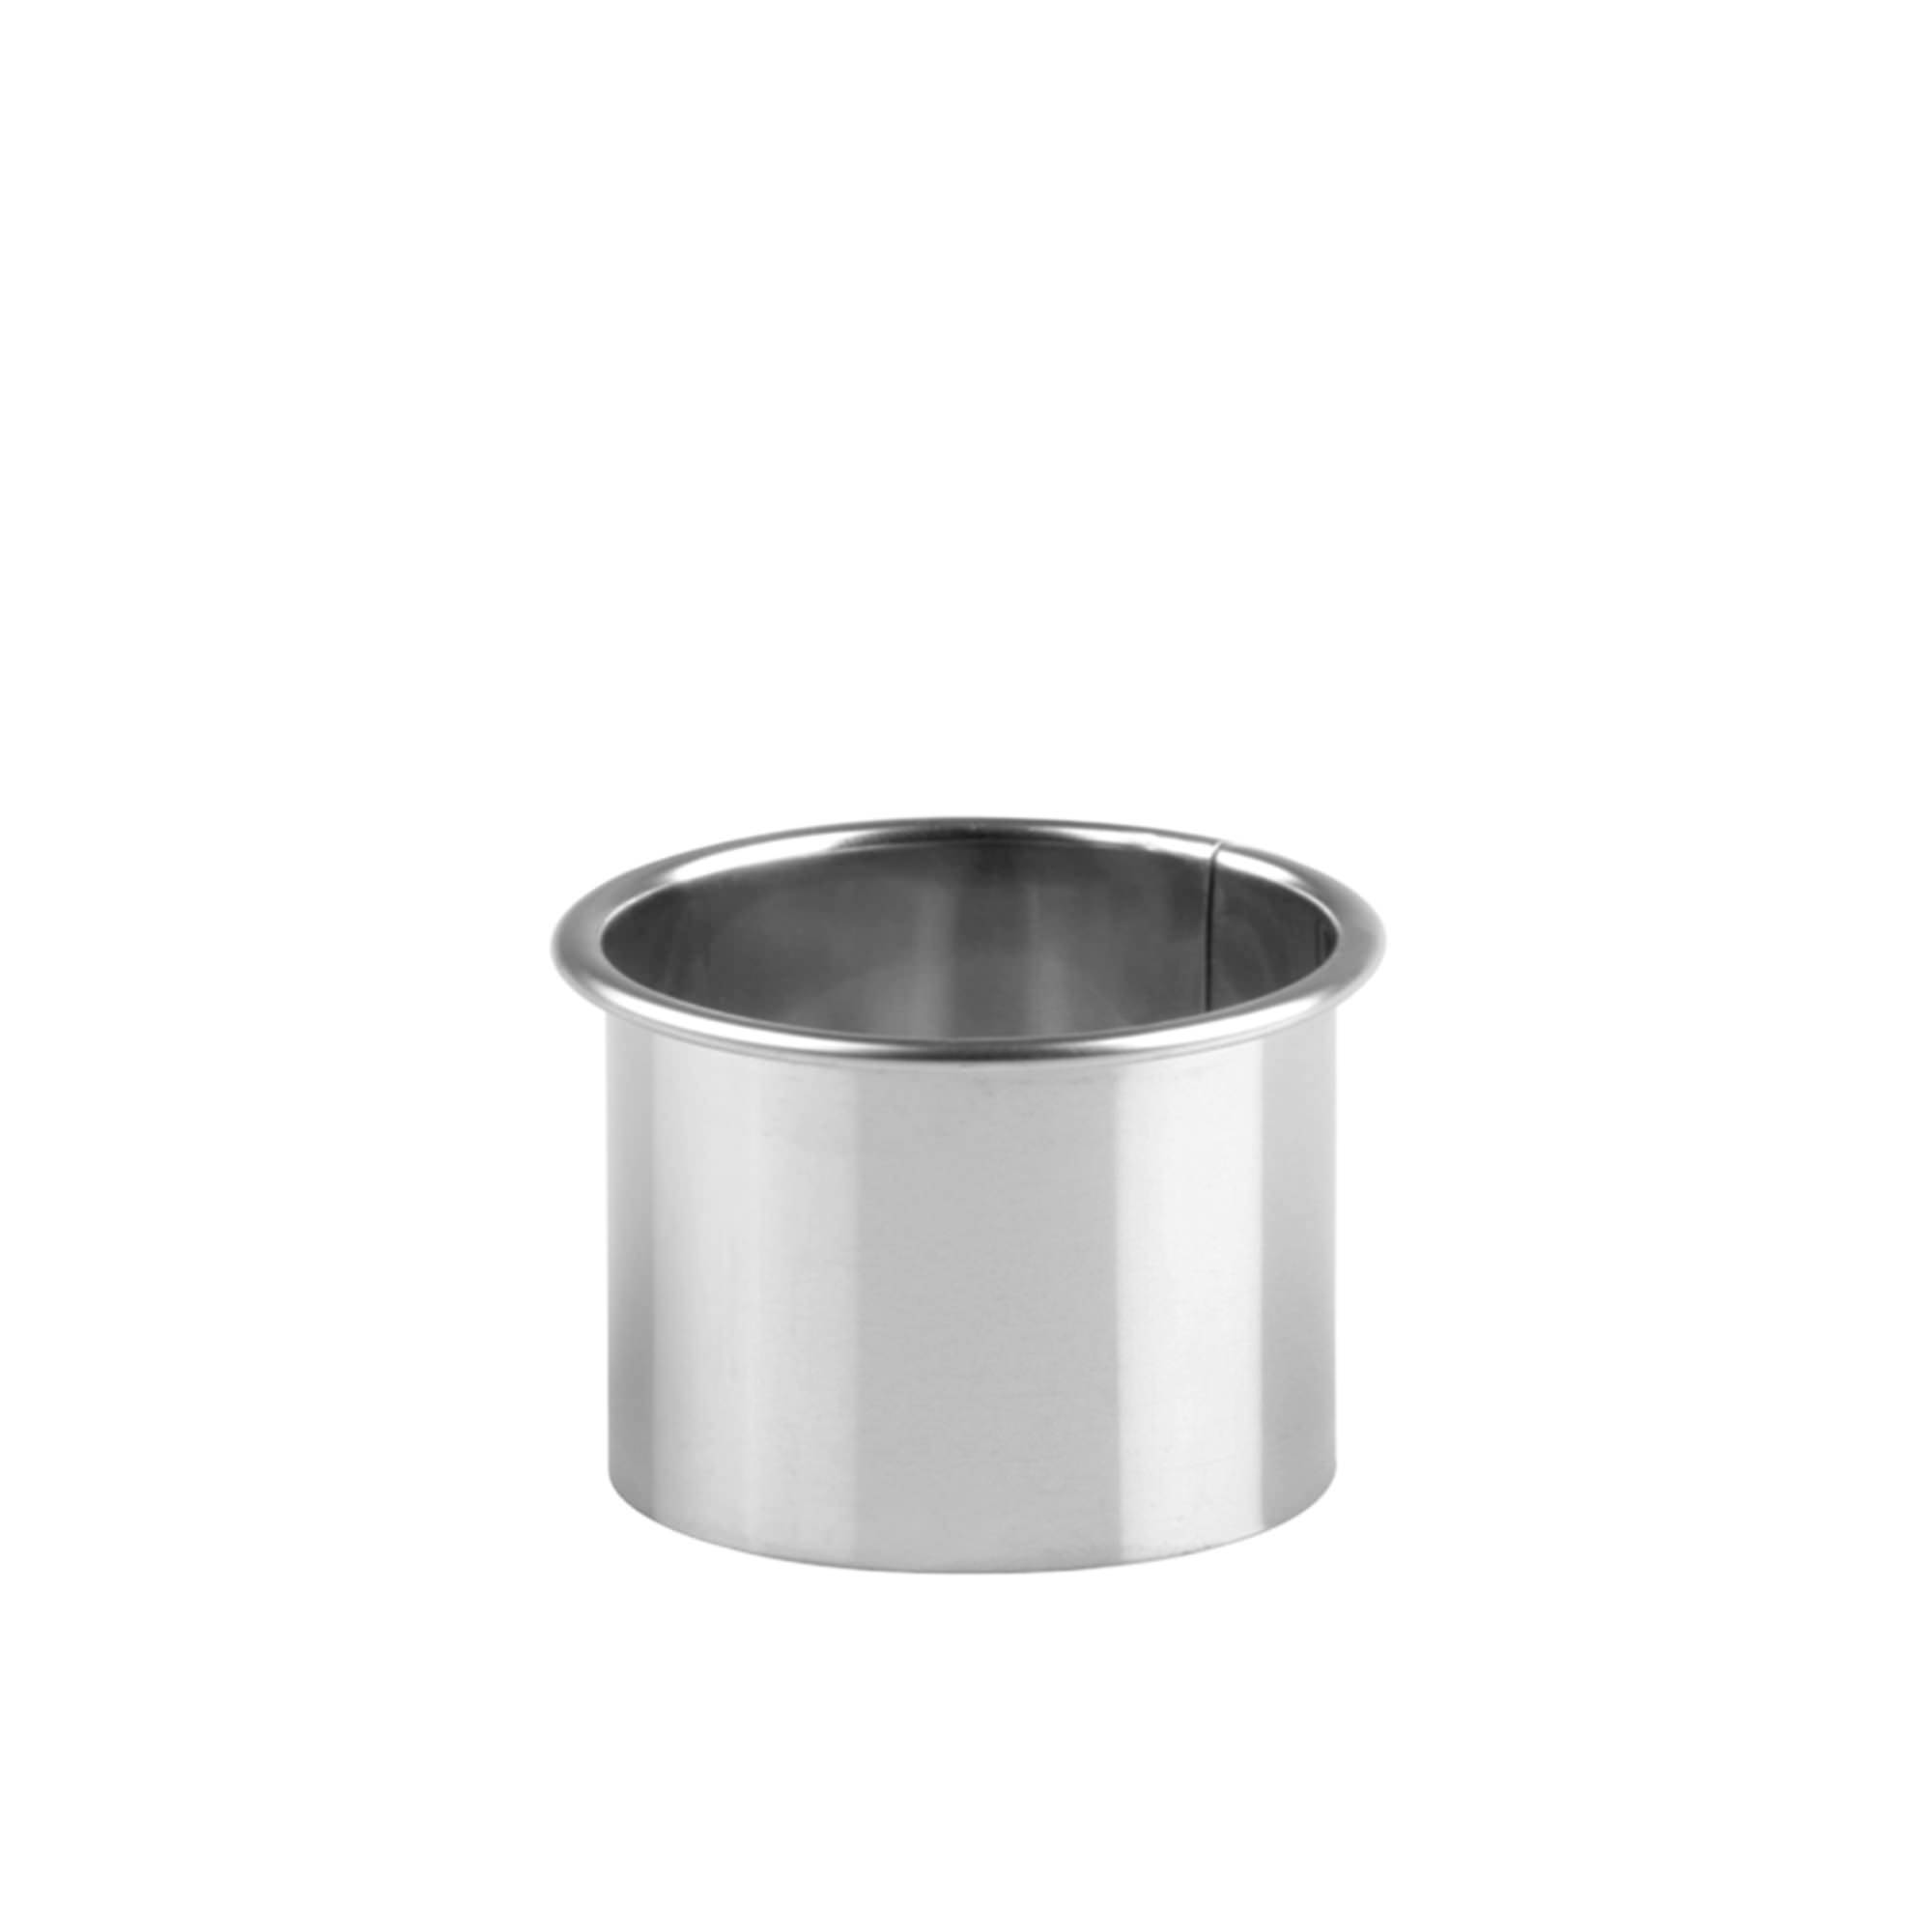 Chef Inox Stainless Steel Plain Biscuit Cutter 6.3cm Image 1